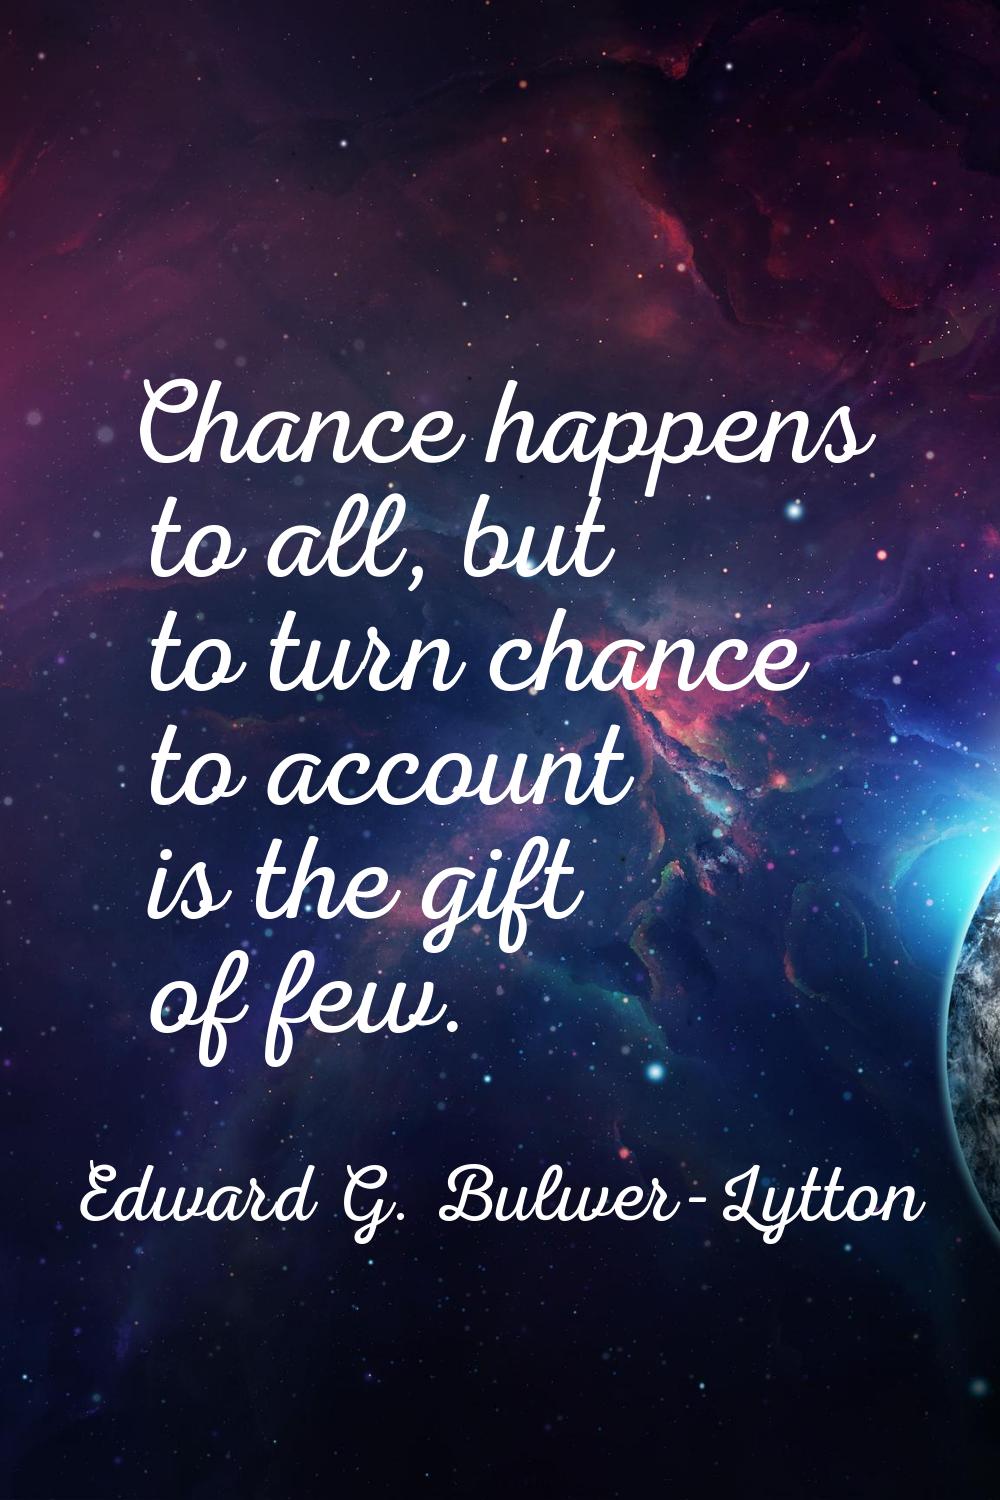 Chance happens to all, but to turn chance to account is the gift of few.